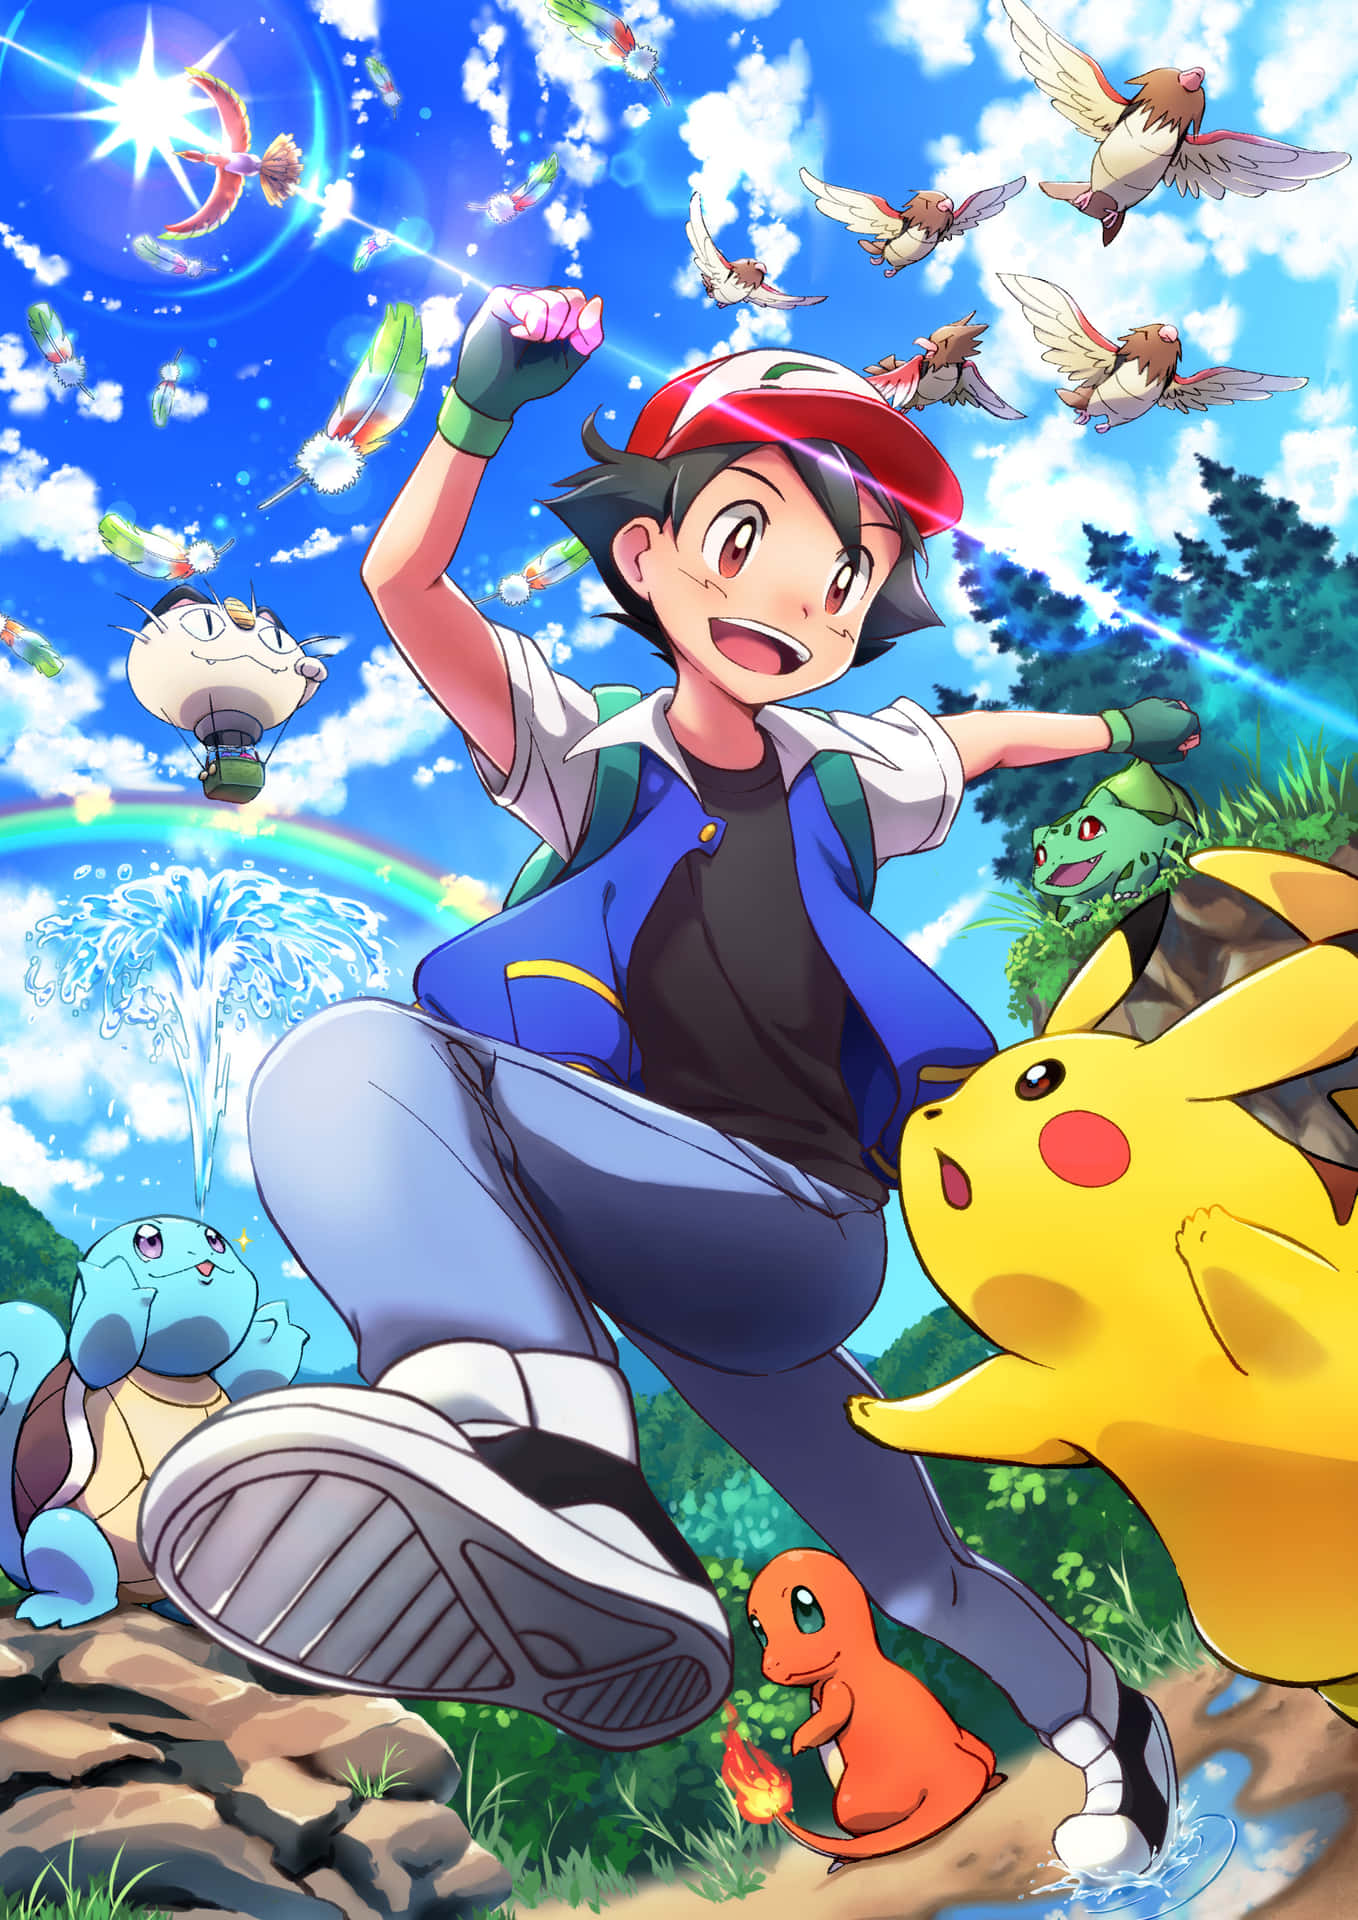 Friends for Life - Ash and Pikachu Wallpaper